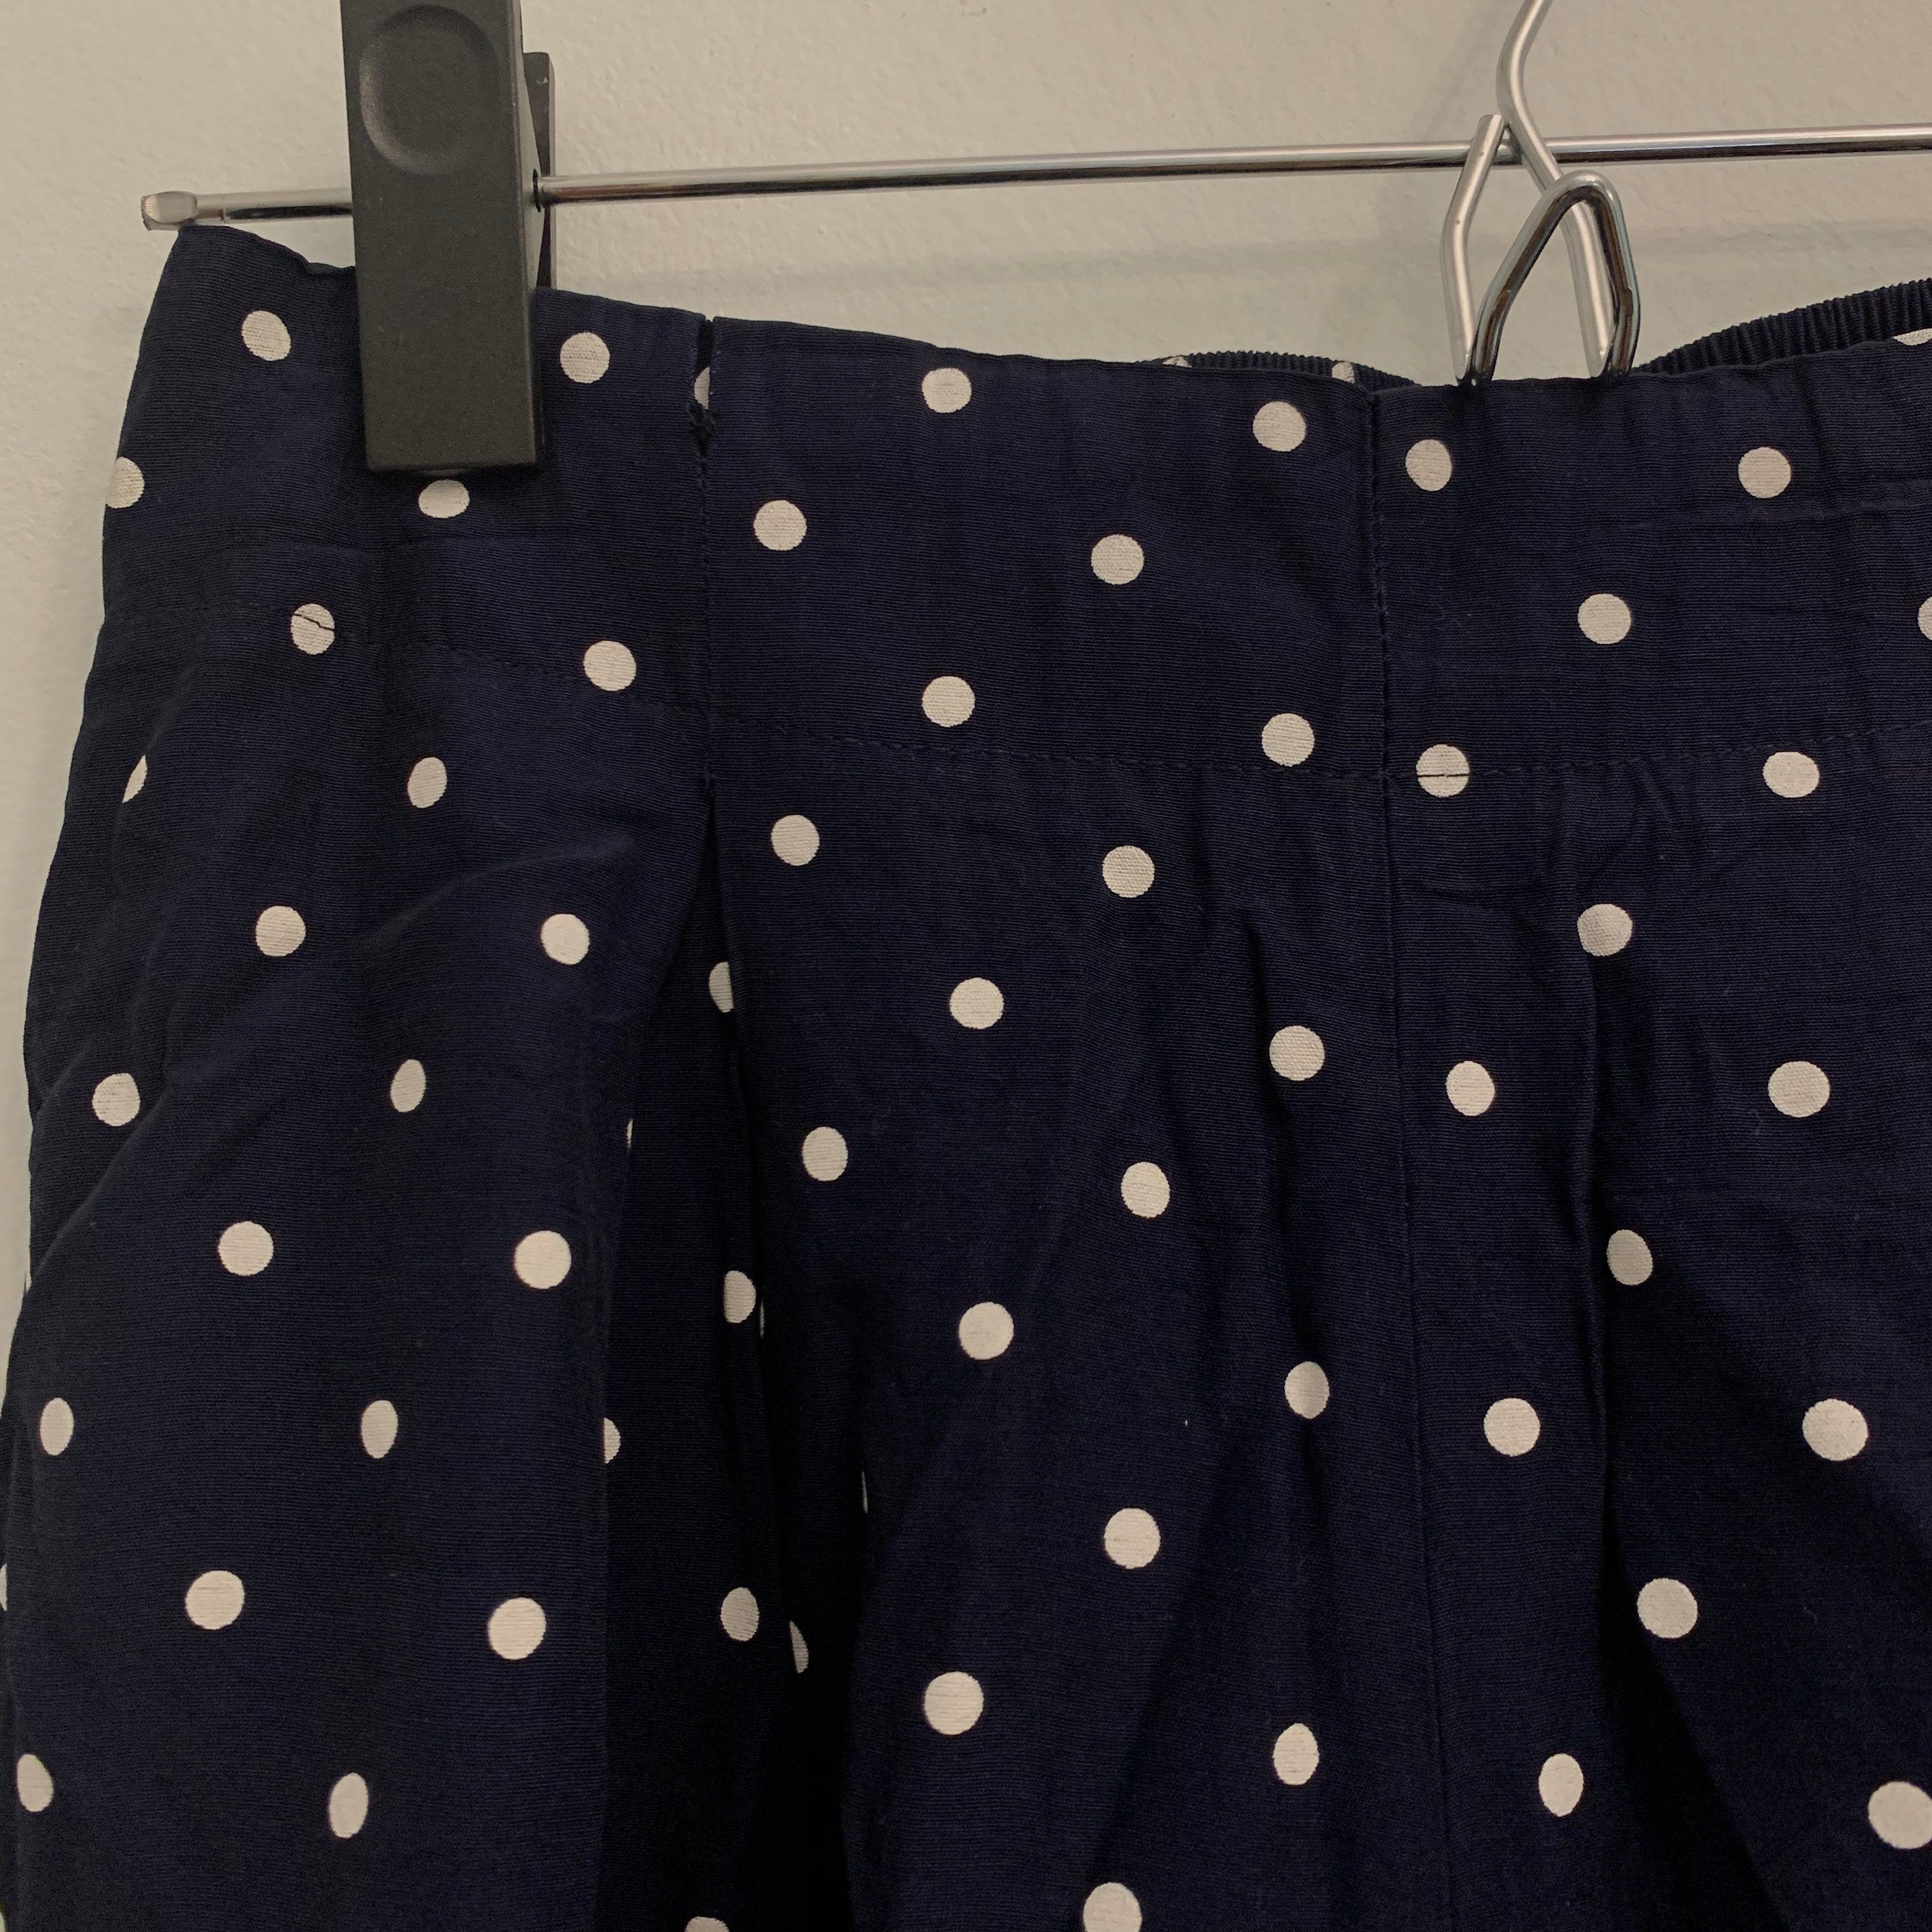 Vintage Navy Shorts with White Polka Dots | Shop THRILLING